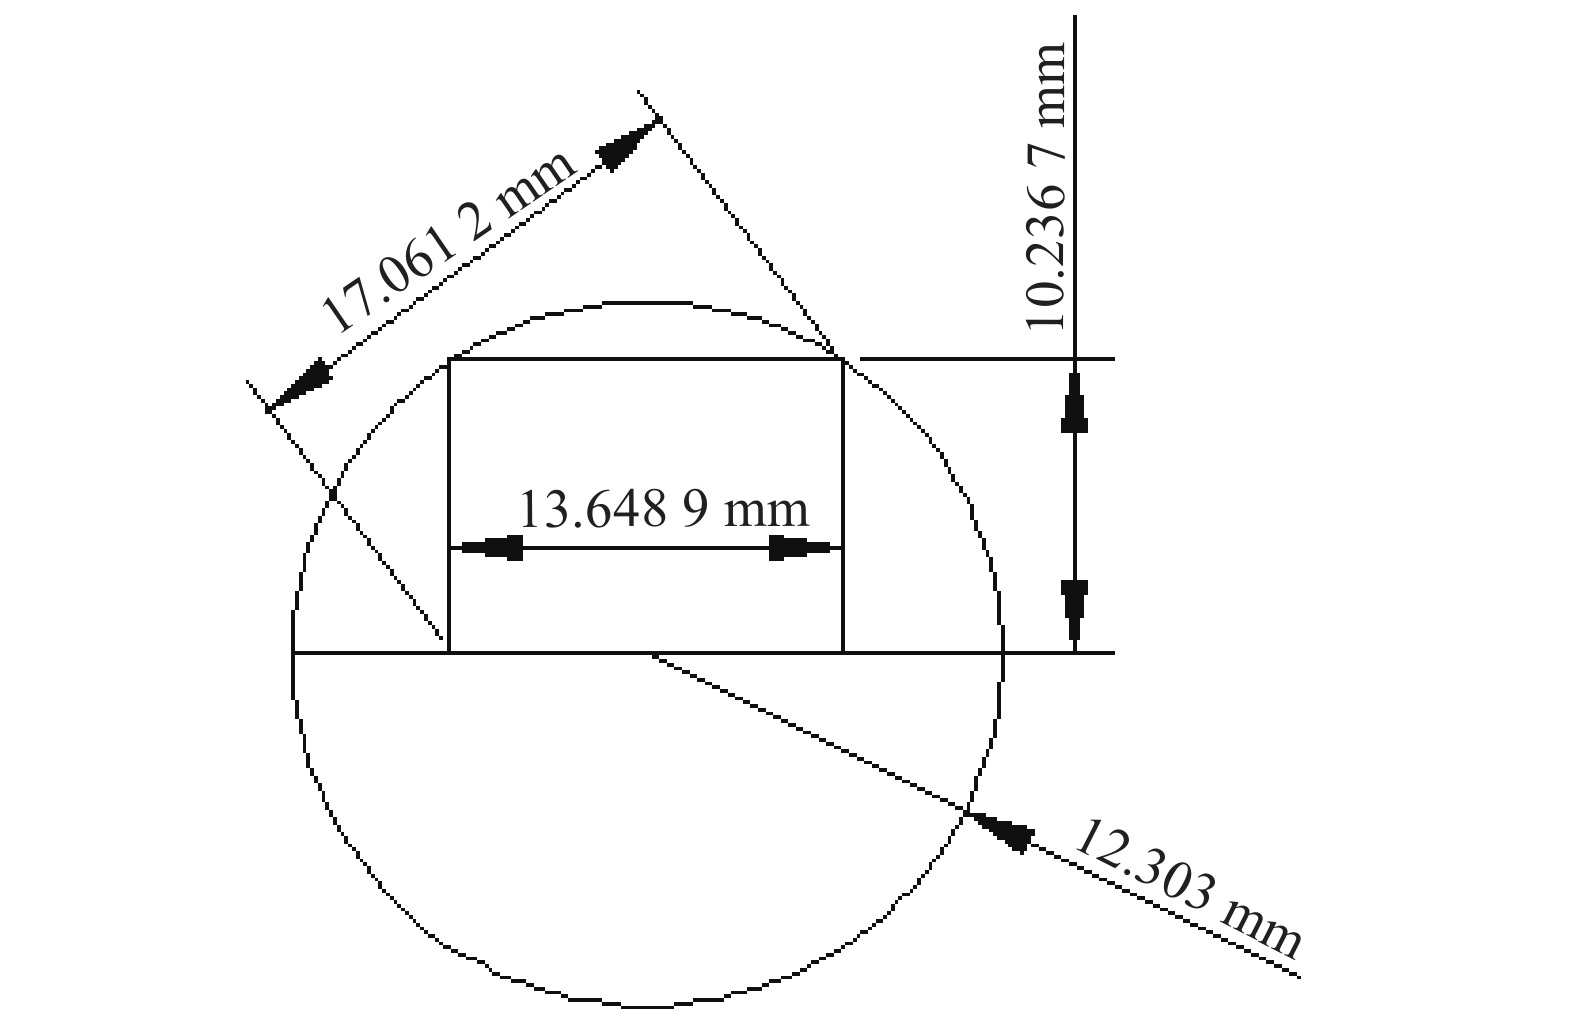 Circle radius diagram of field of view. Radius of the image plane is 12.303 mm, aspect ratio of the image plane is 4:3, length of the long side is 13.648 9 mm, and length of the wide side is 10.236 7 mm